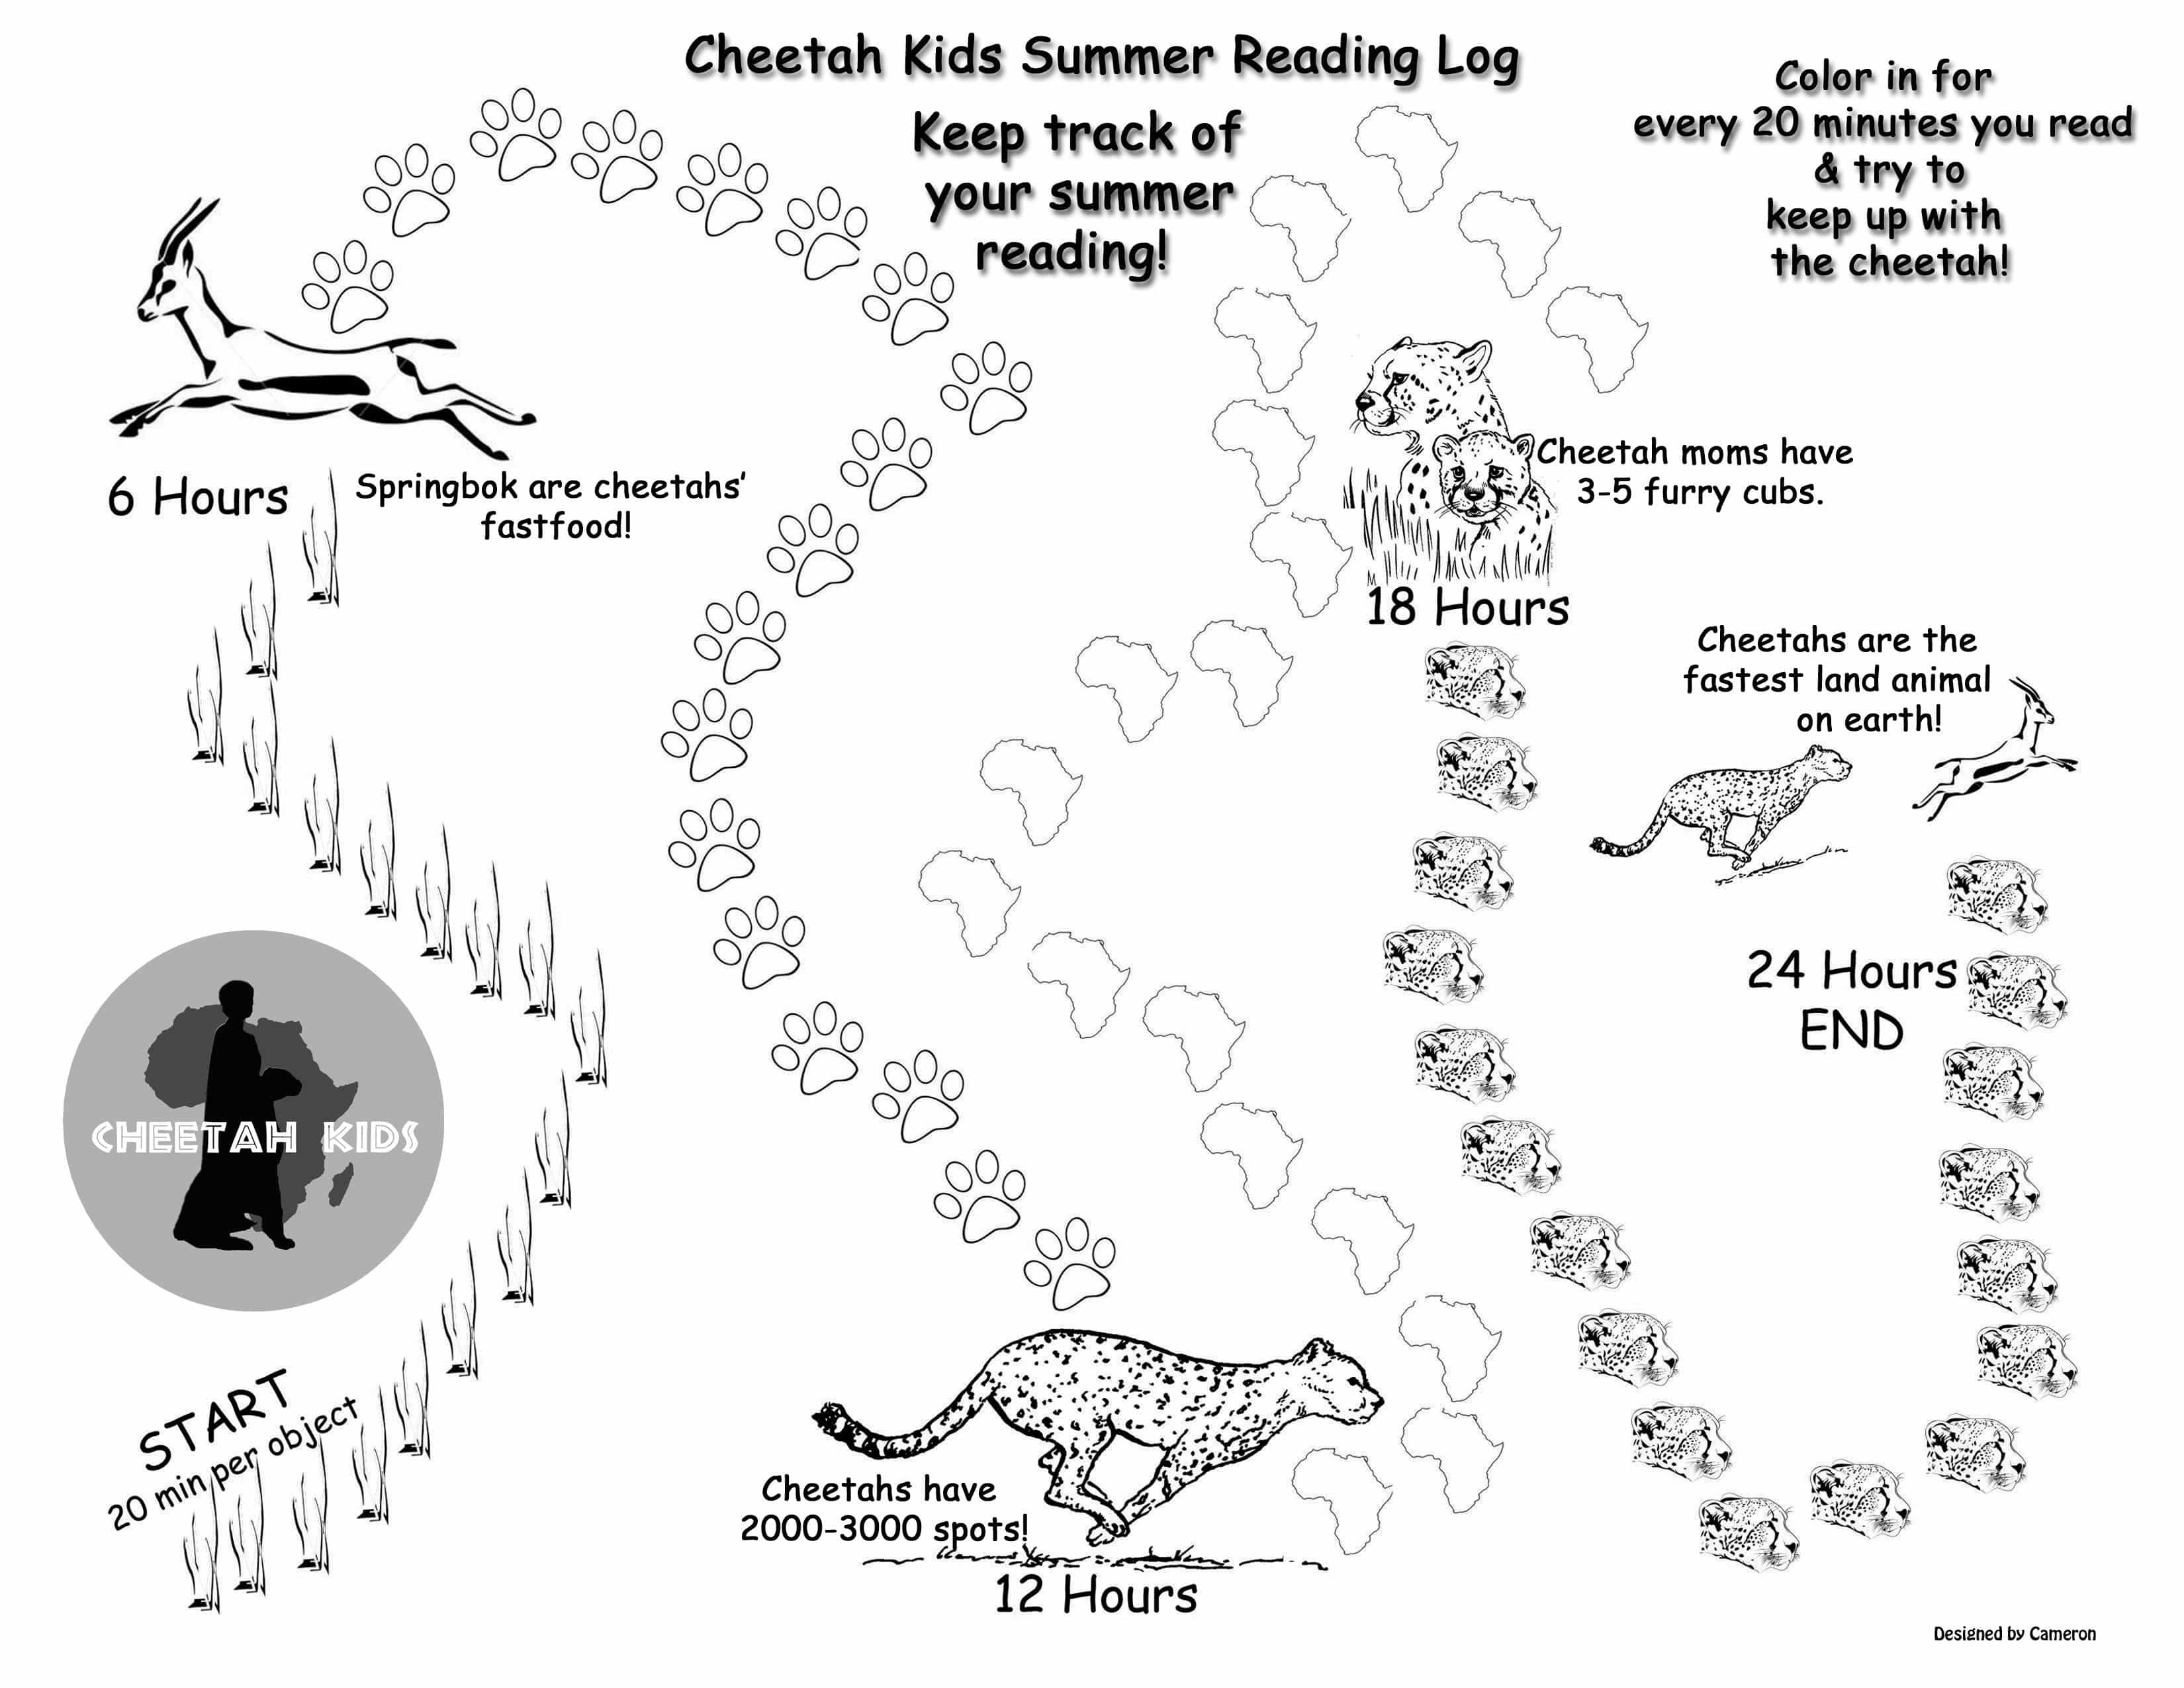 Print a summer reading log and follow the cheetah facts to record your reading.